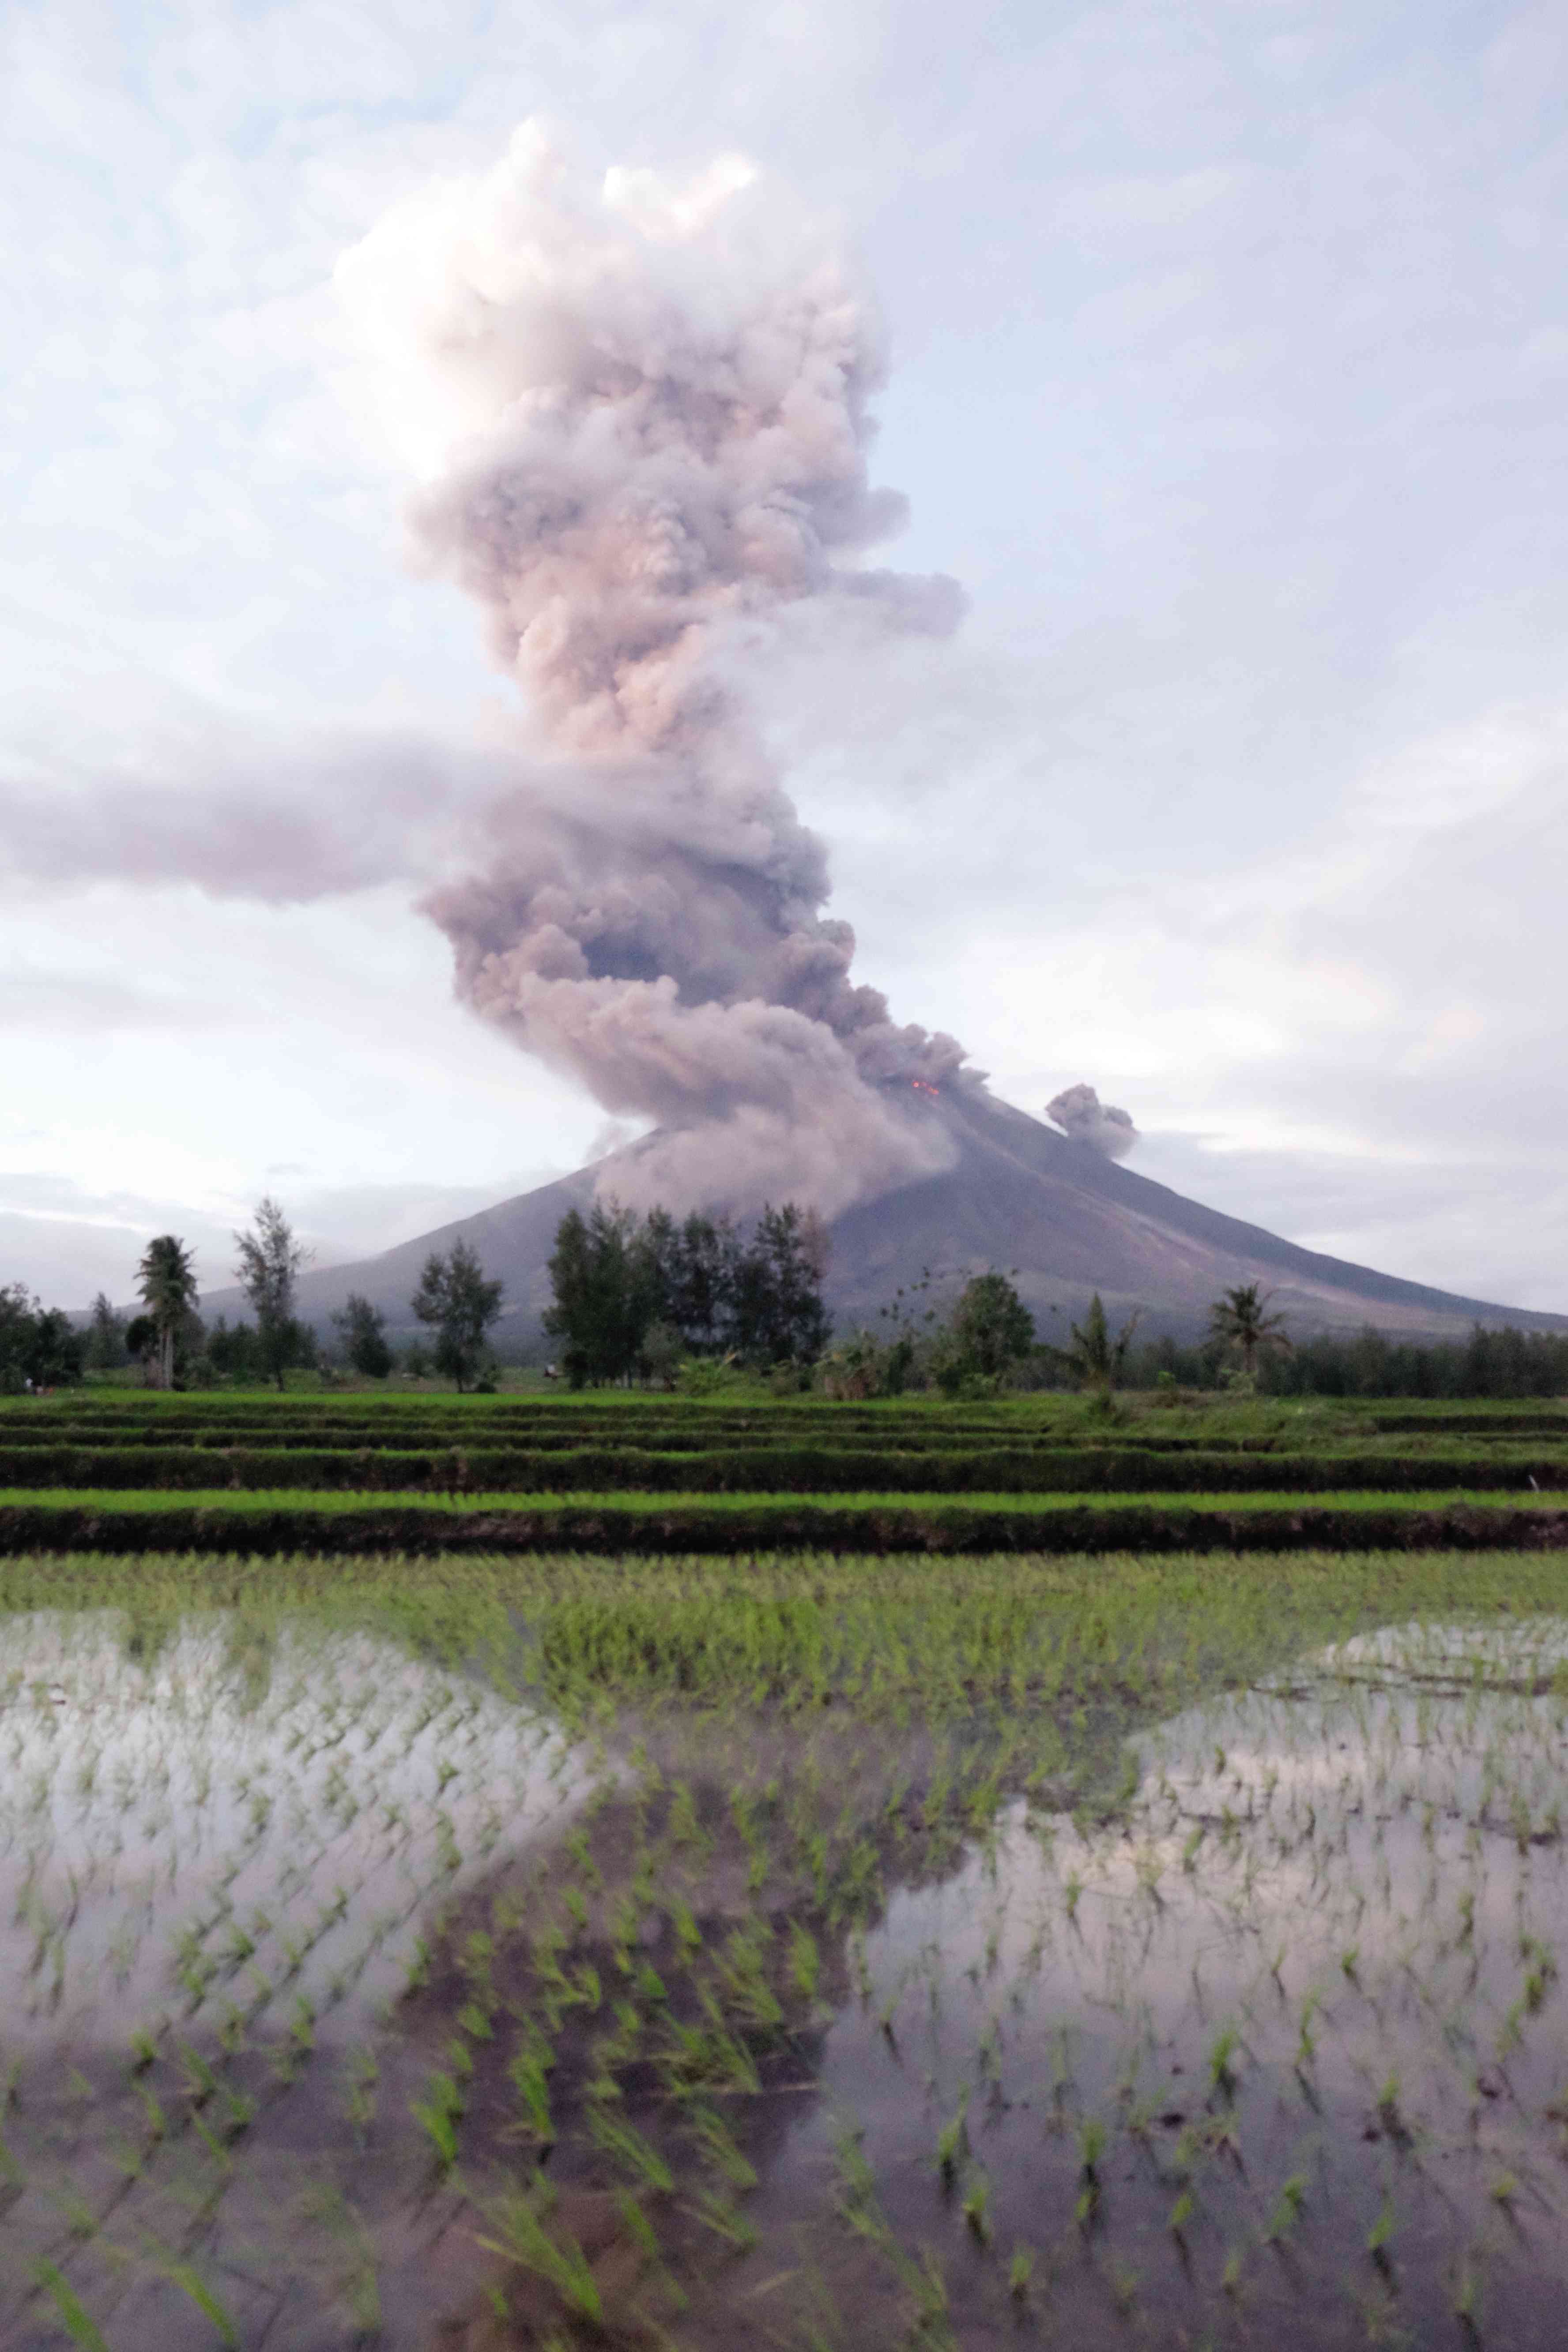 An image of Mayon spewing ash and pyroclastic materials is reflected on a farm in the village of Busay in Daraga town, Albay province. The country’s most active volcano continued to show signs of unrest and residents around danger zones had been told to flee. Authorities had raised Alert Level 4 in areas around the volcano, prohibiting entry into a 7-8 kilometer danger zone. —NIÑO JESUS ORBETA